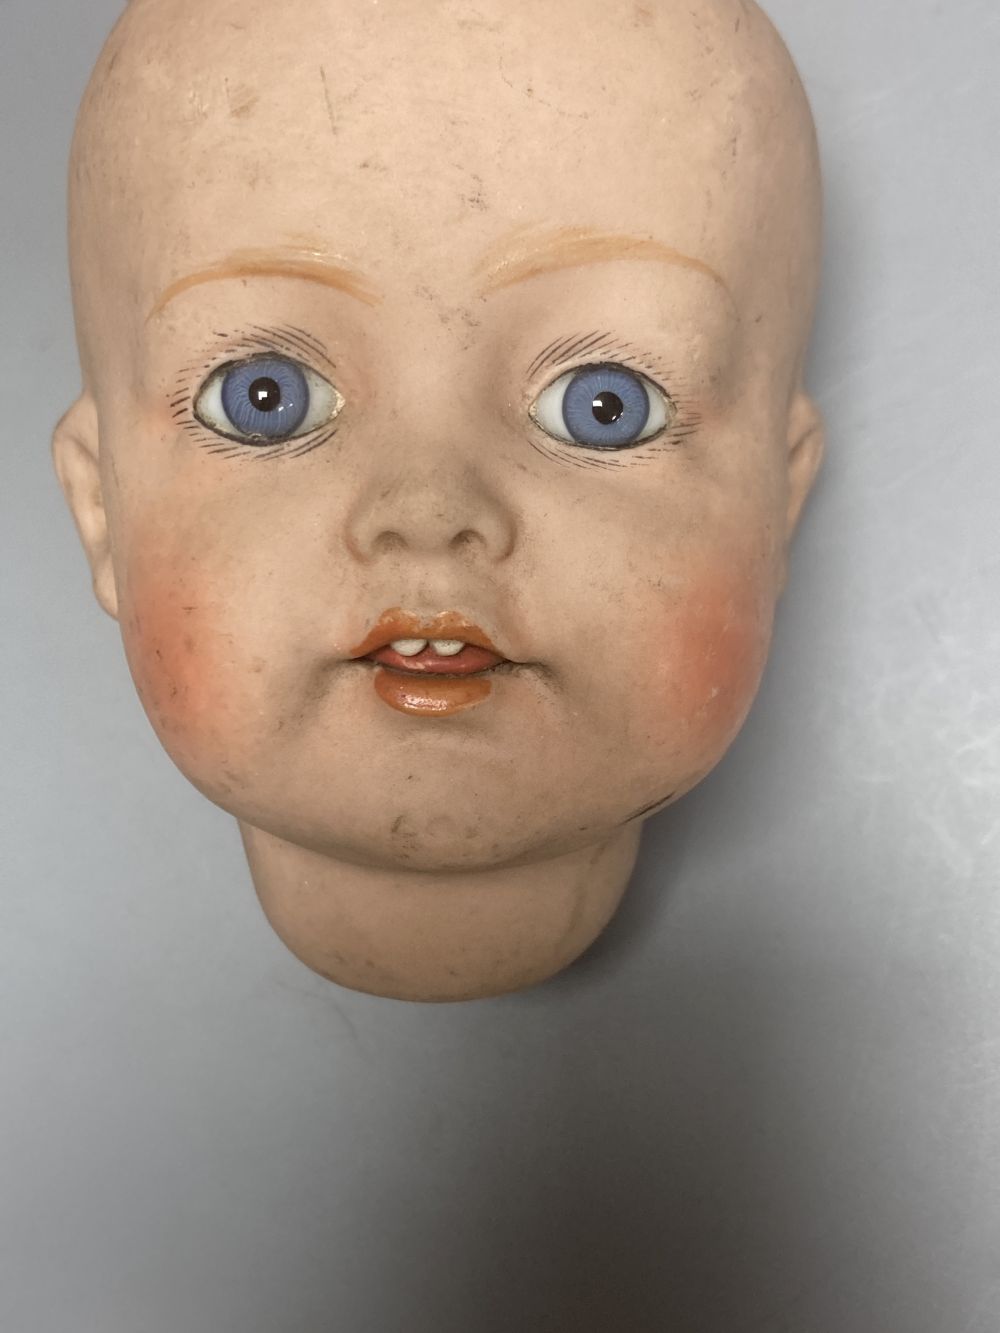 A Kammer & Reinhardt / Simon & Halbig bisque doll head, 10cm, three other German bisque doll heads and two English bisque doll heads,